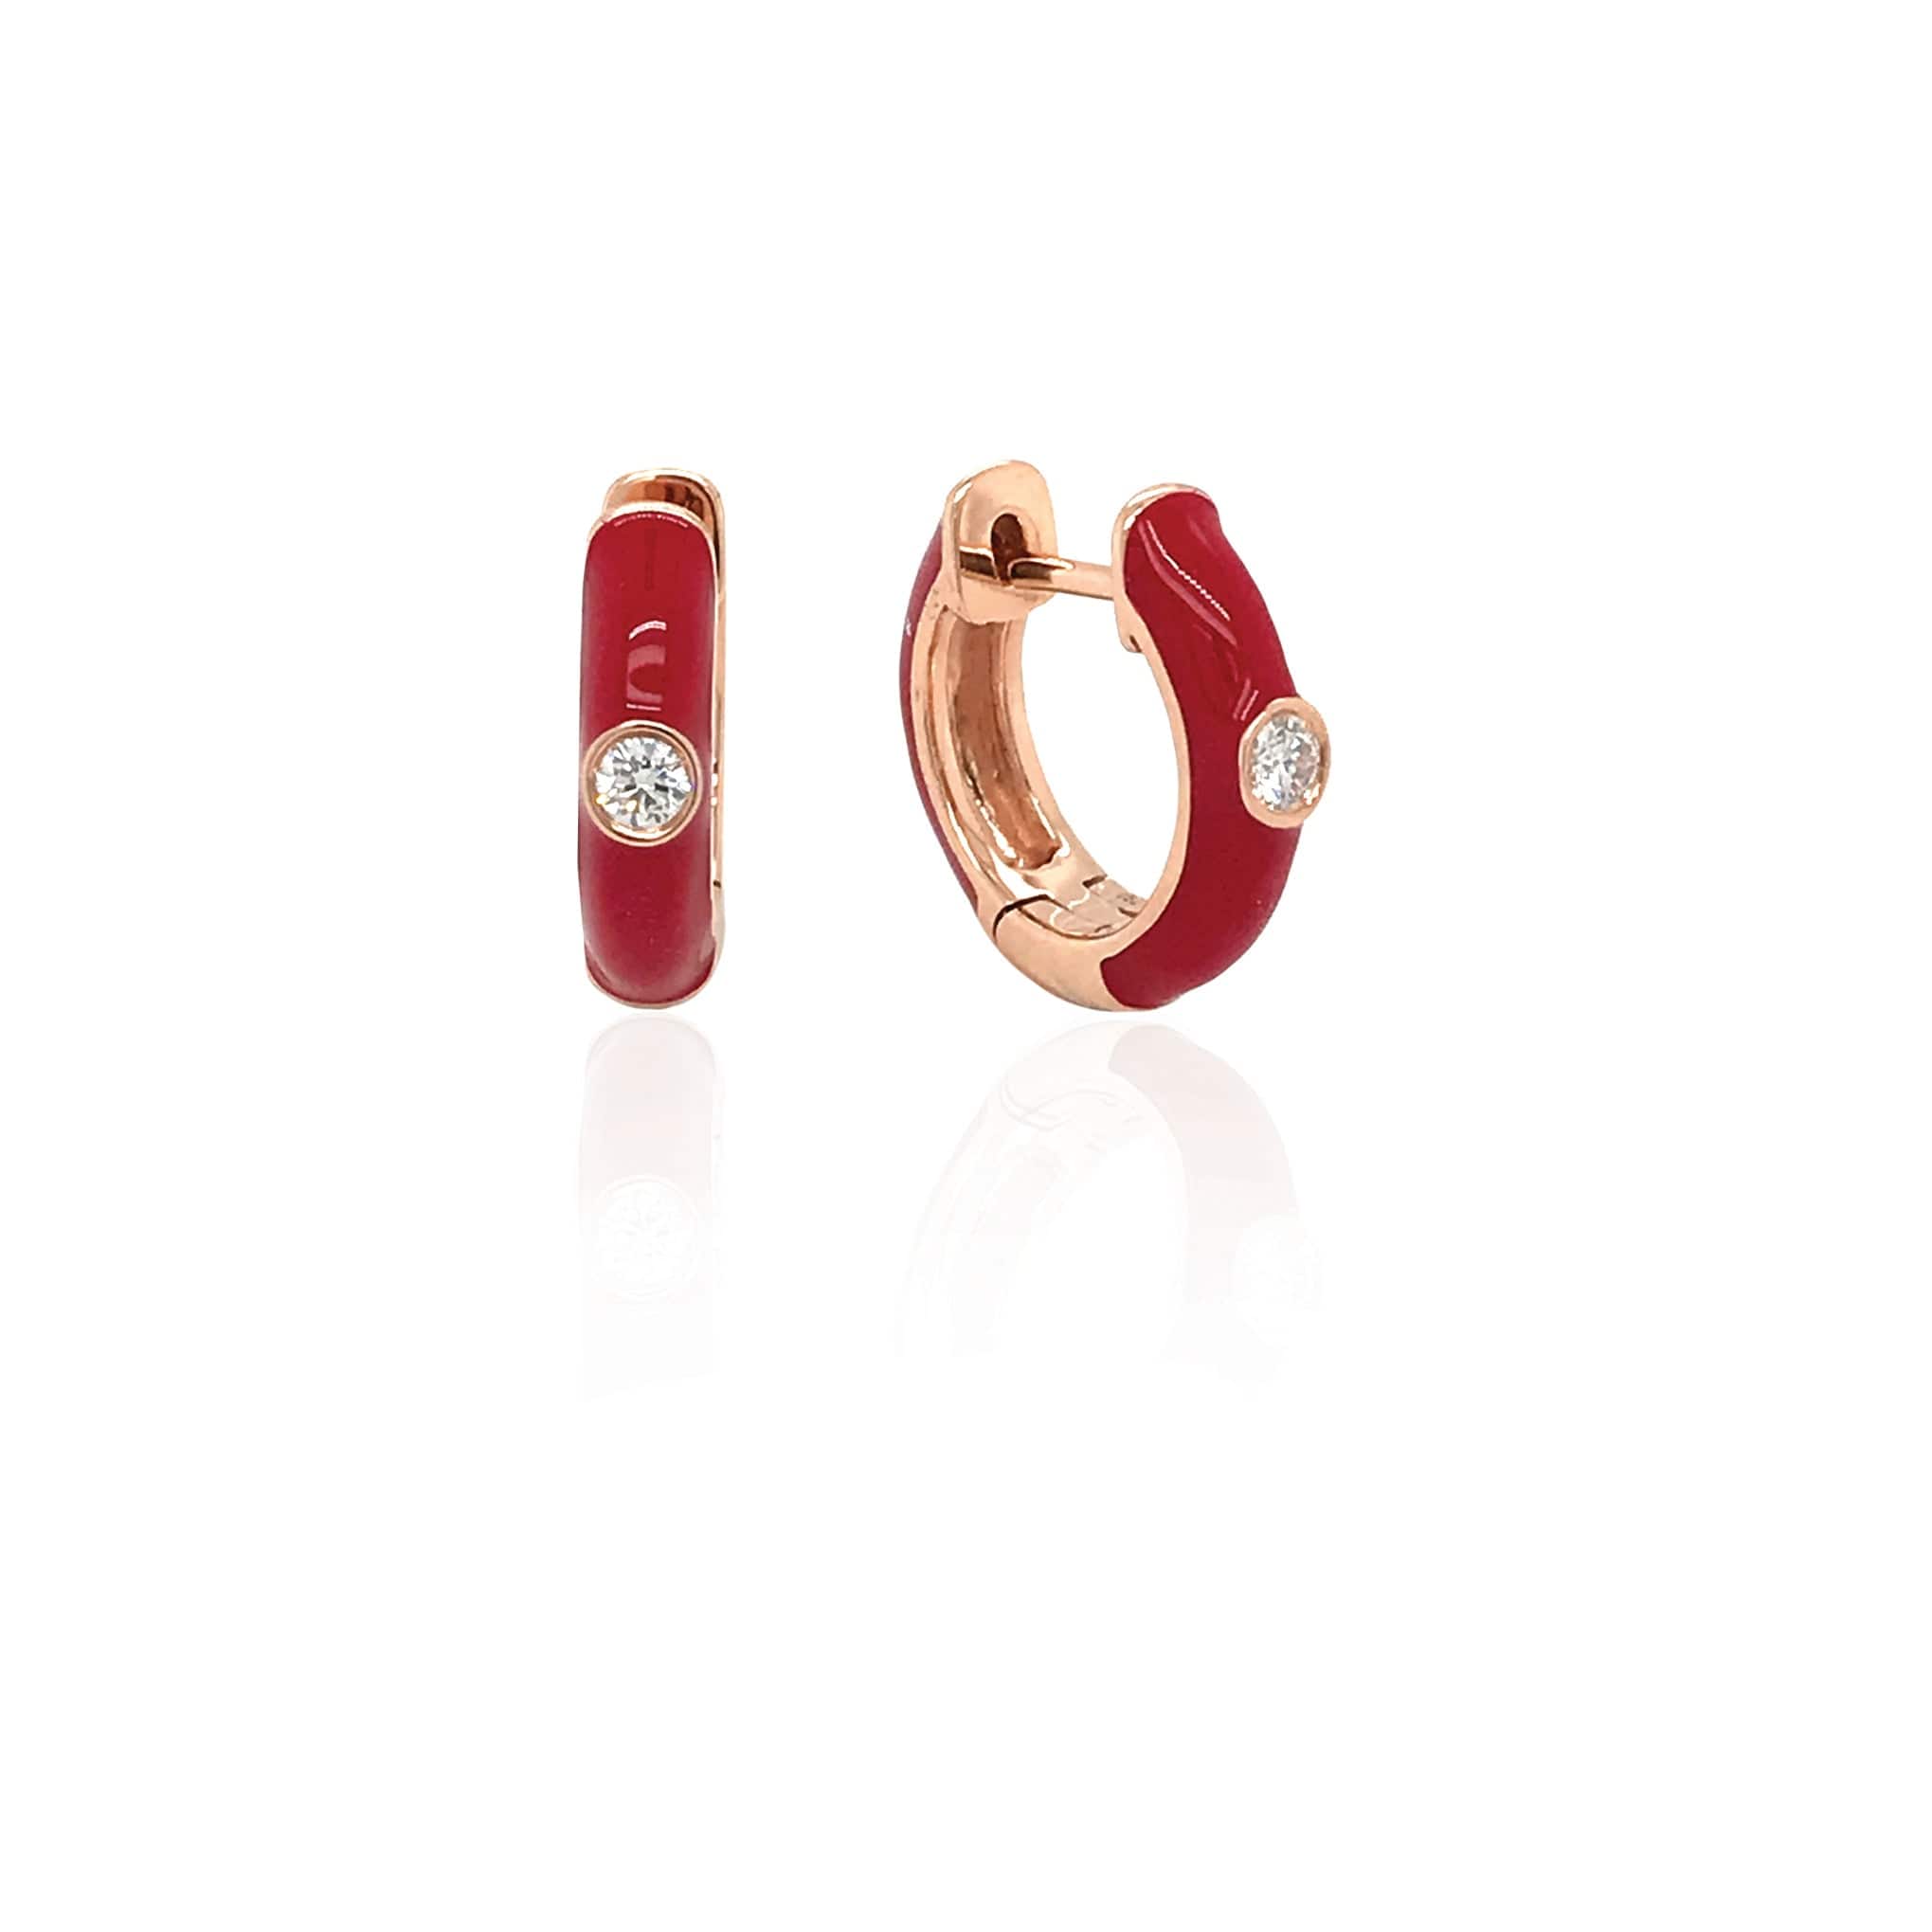 M.Fitaihi Candy - Gold Light Red Earrings With Diamond - M.Fitaihi